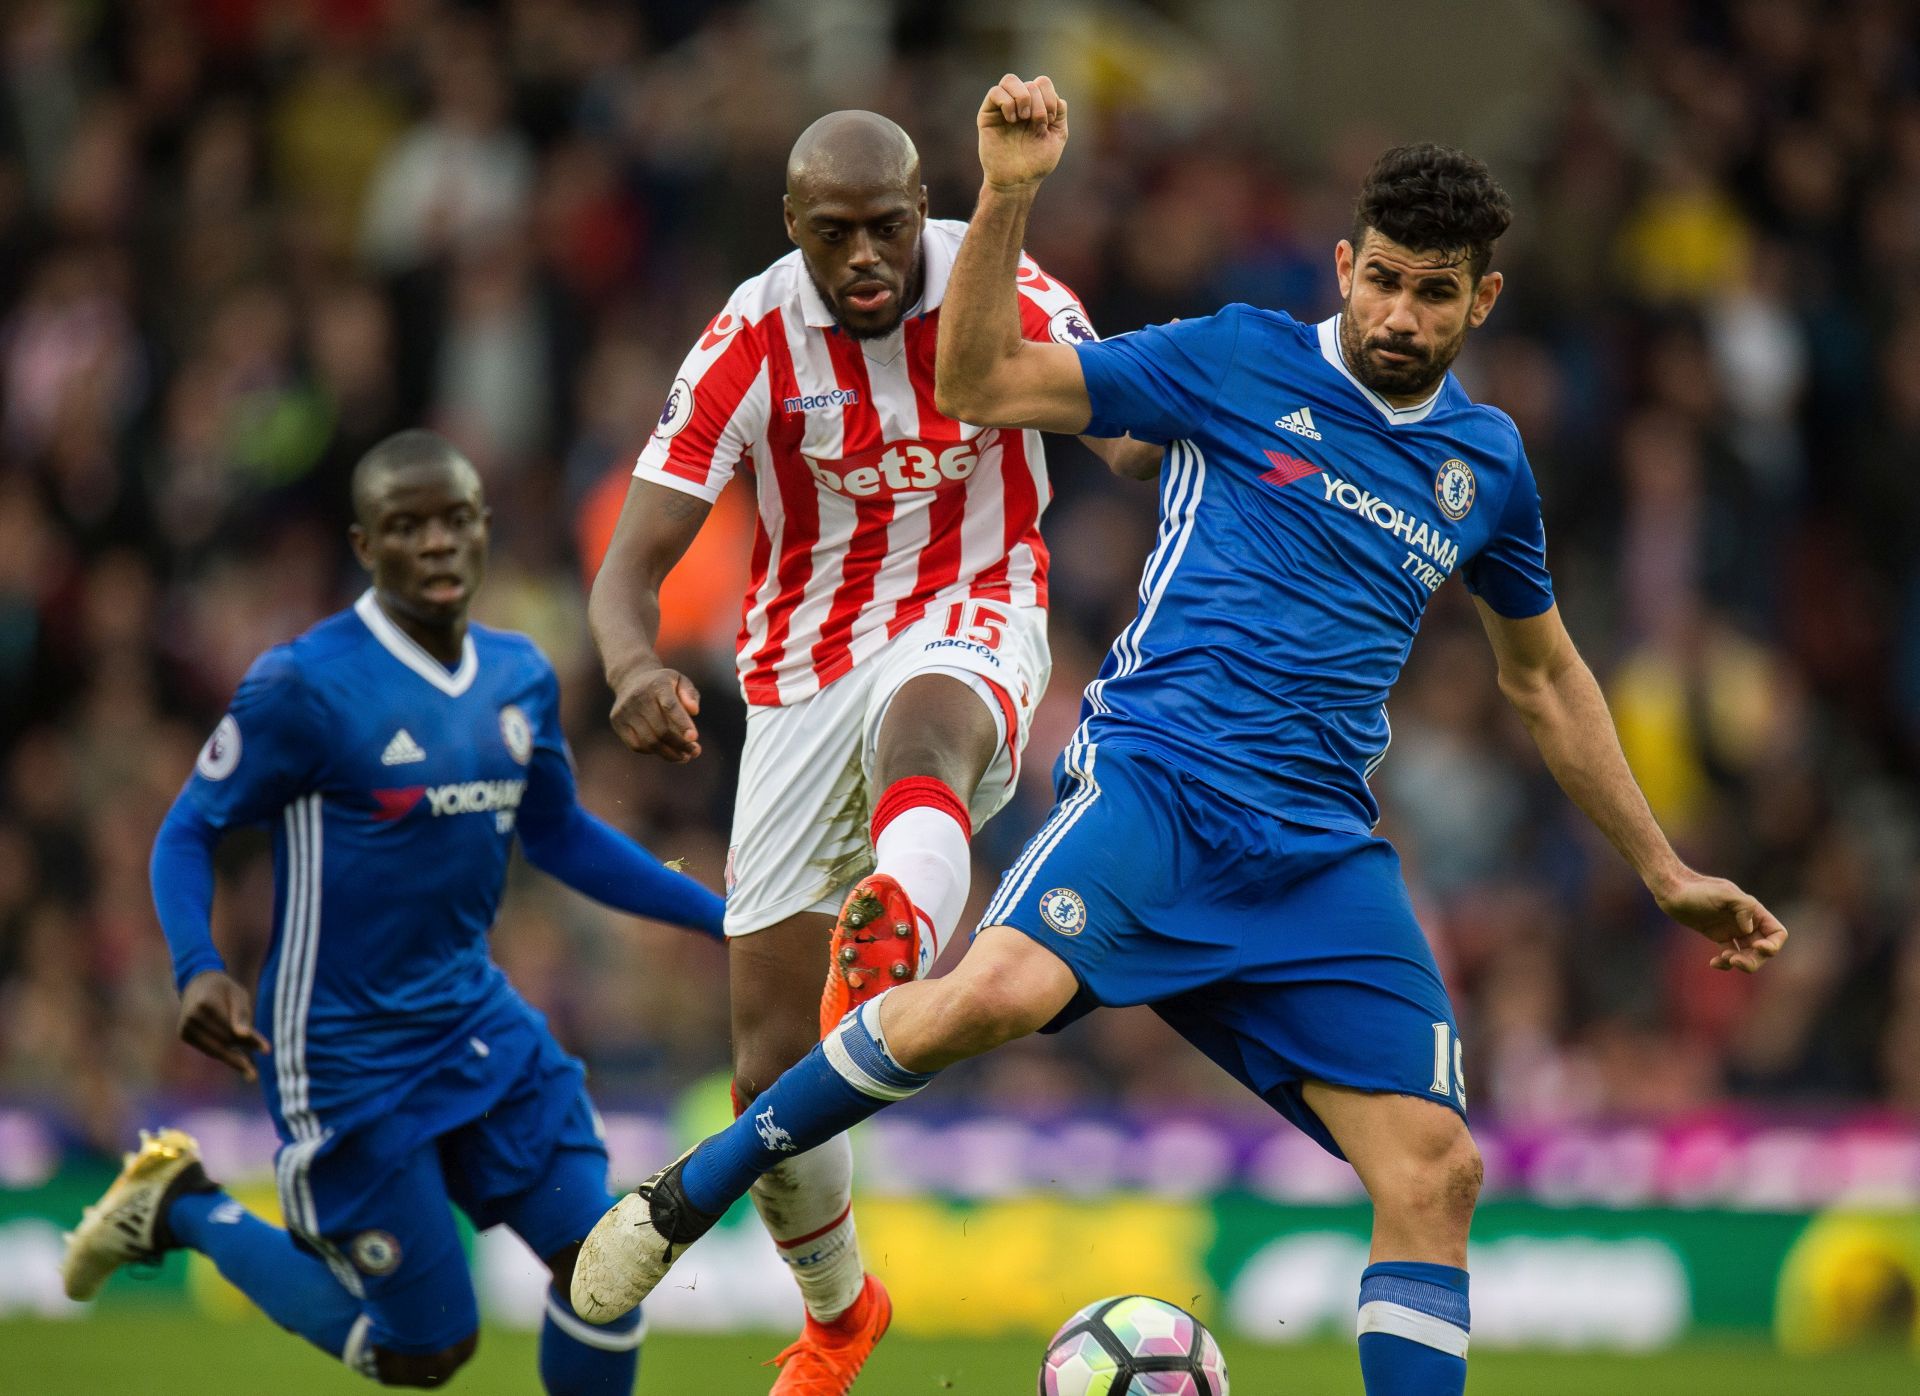 epa05856490 Stoke City's Bruno Martins Indi (L) in action with Chelsea's Diego Costa (R) during the English Premier League soccer match between Stoke City and Chelsea in Stoke, Britain, 18 March 2017.  EPA/PETER POWELL EDITORIAL USE ONLY. No use with unauthorized audio, video, data, fixture lists, club/league logos or 'live' services. Online in-match use limited to 75 images, no video emulation. No use in betting, games or single club/league/player publications